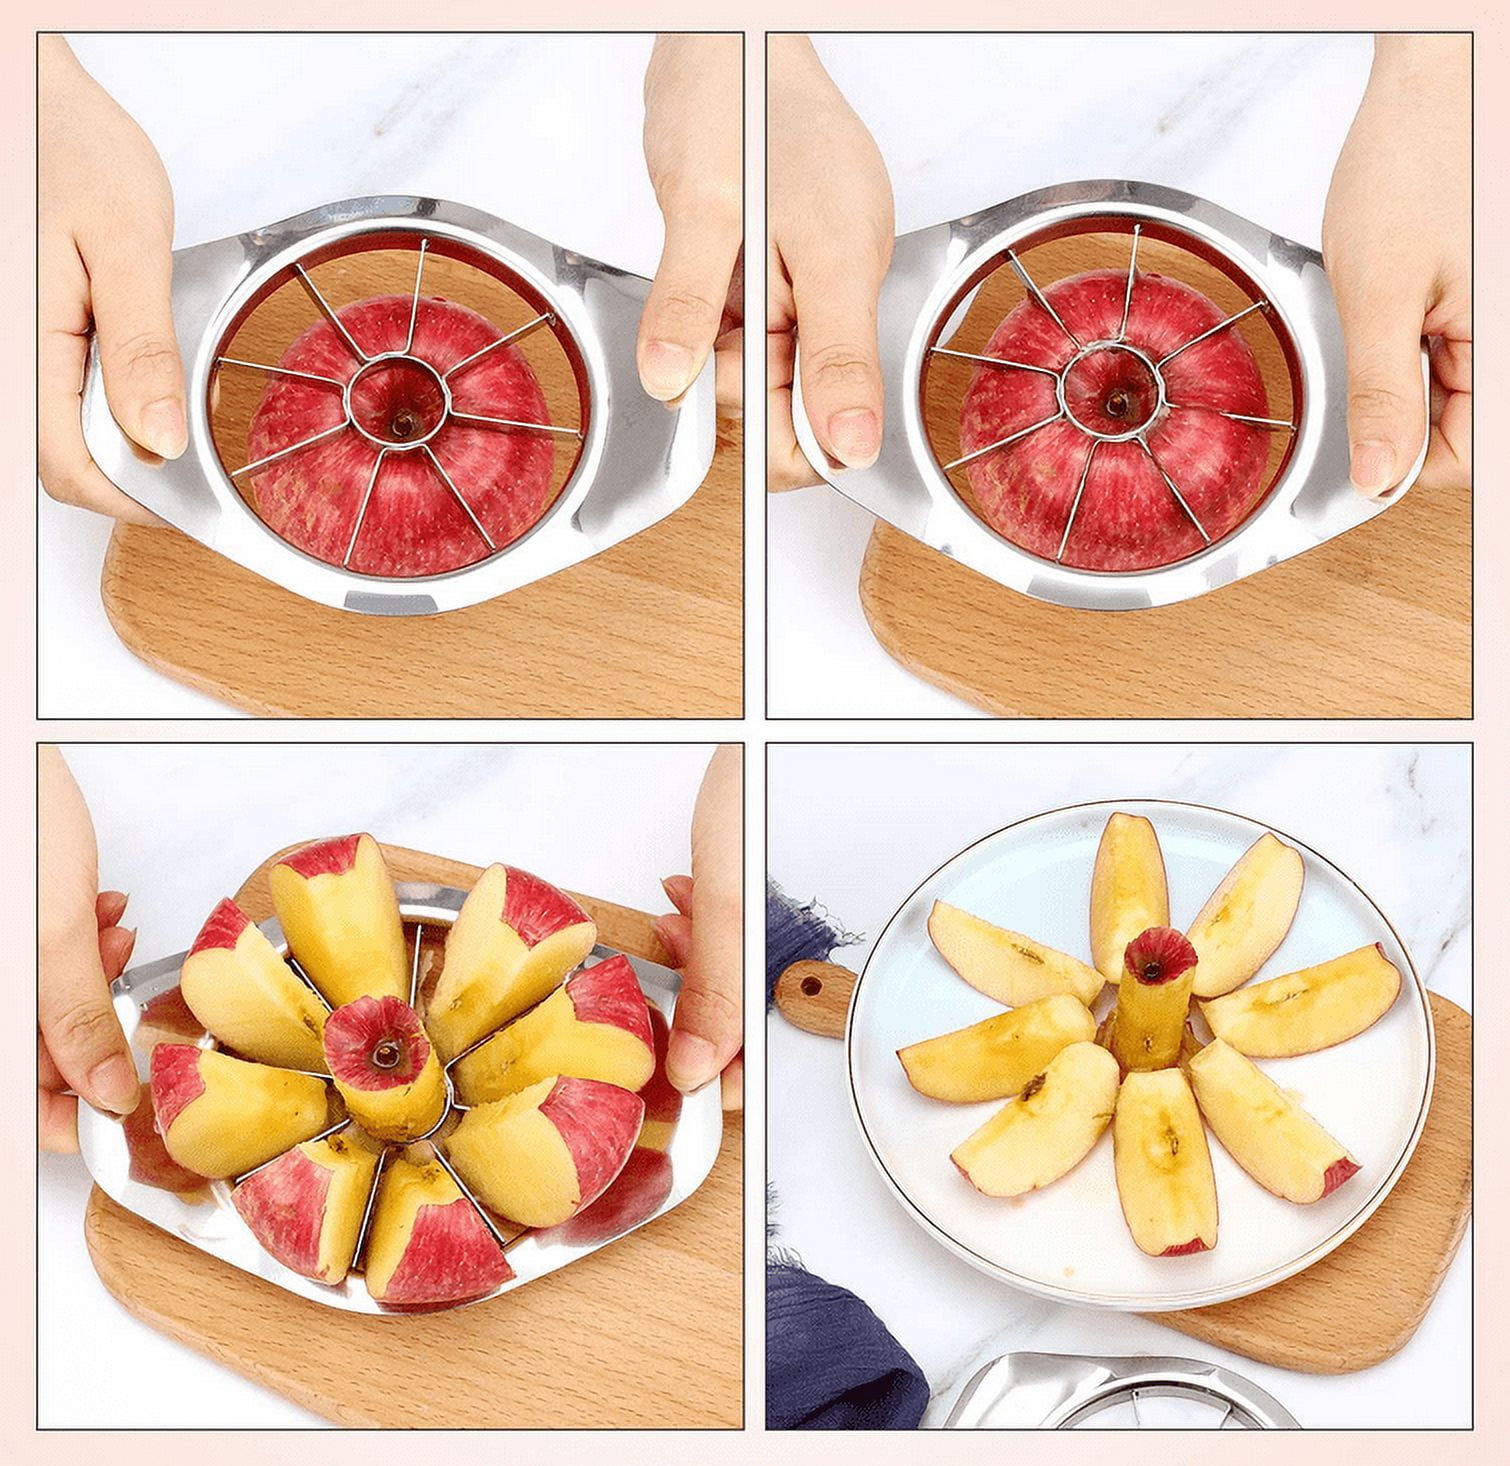 Apple Cutter, Stainless Steel Apple Slicer and Corer Fruit Vegetable Cutter  with Sharp Stainless Steel Blade and Easy Grip Handle Lightweight Kitchen